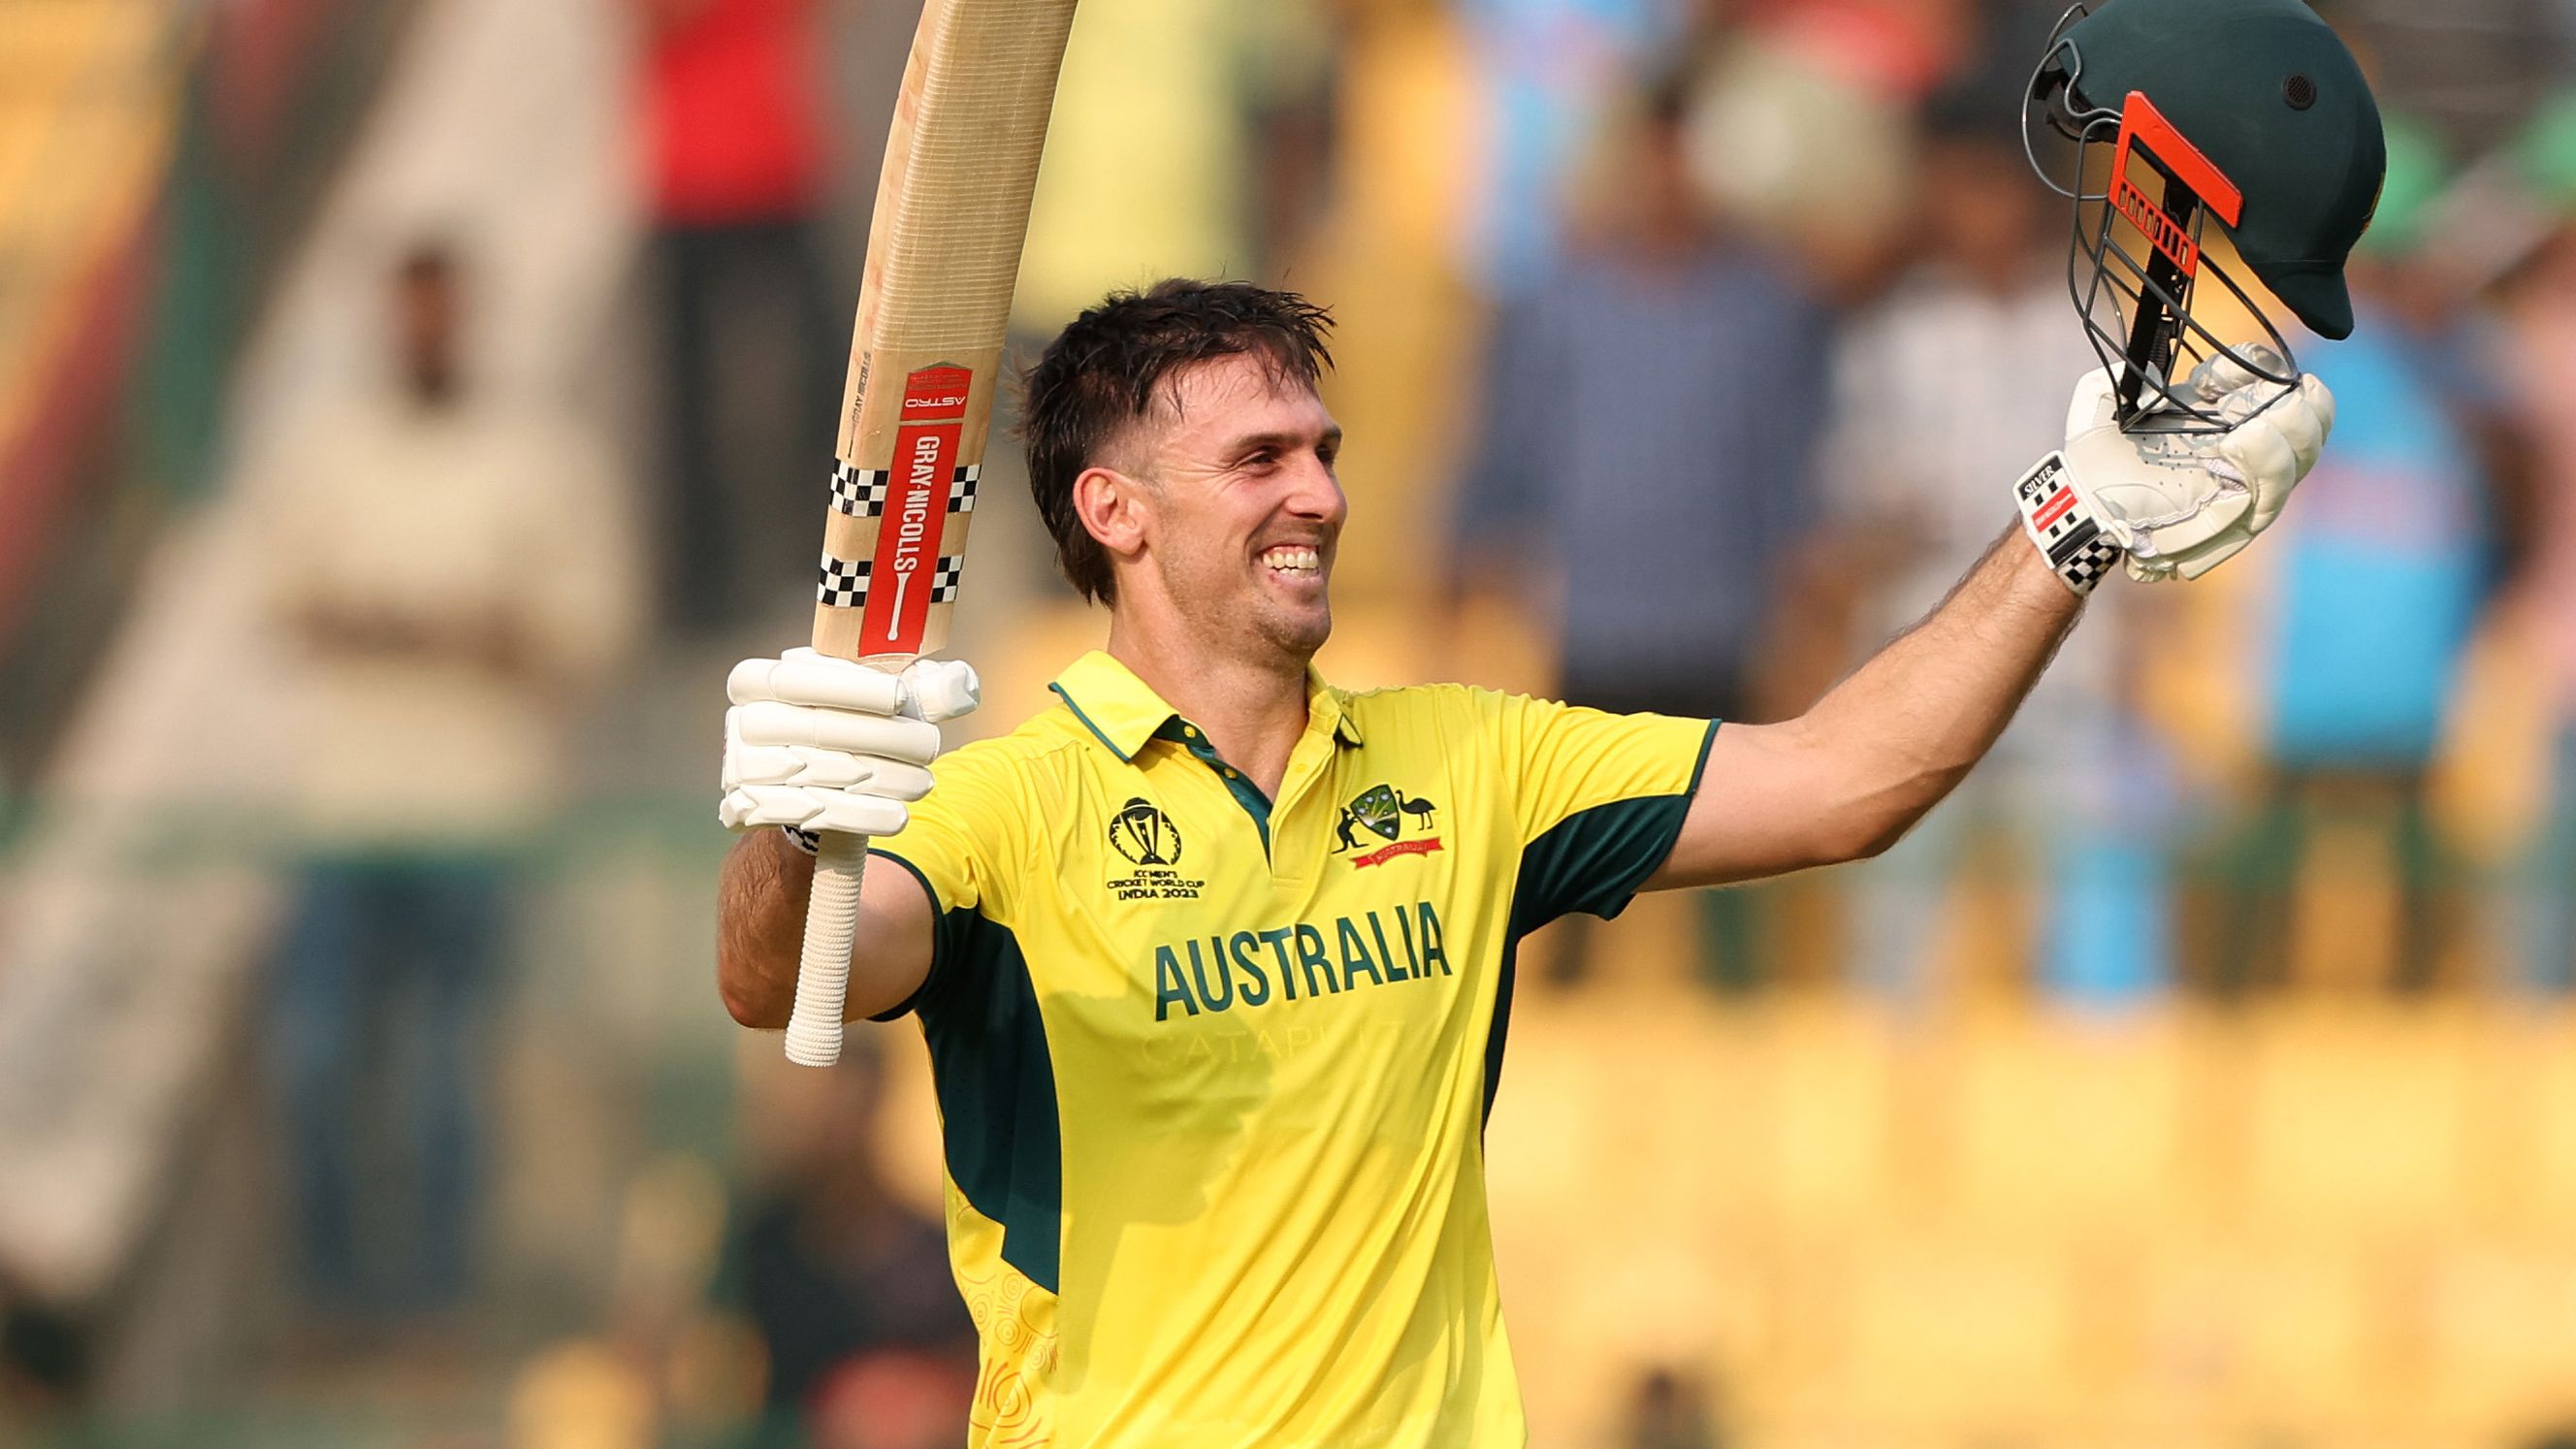 'I'll be back to win this World Cup': Mitchell Marsh's stirring message after returning home for 'personal reasons'